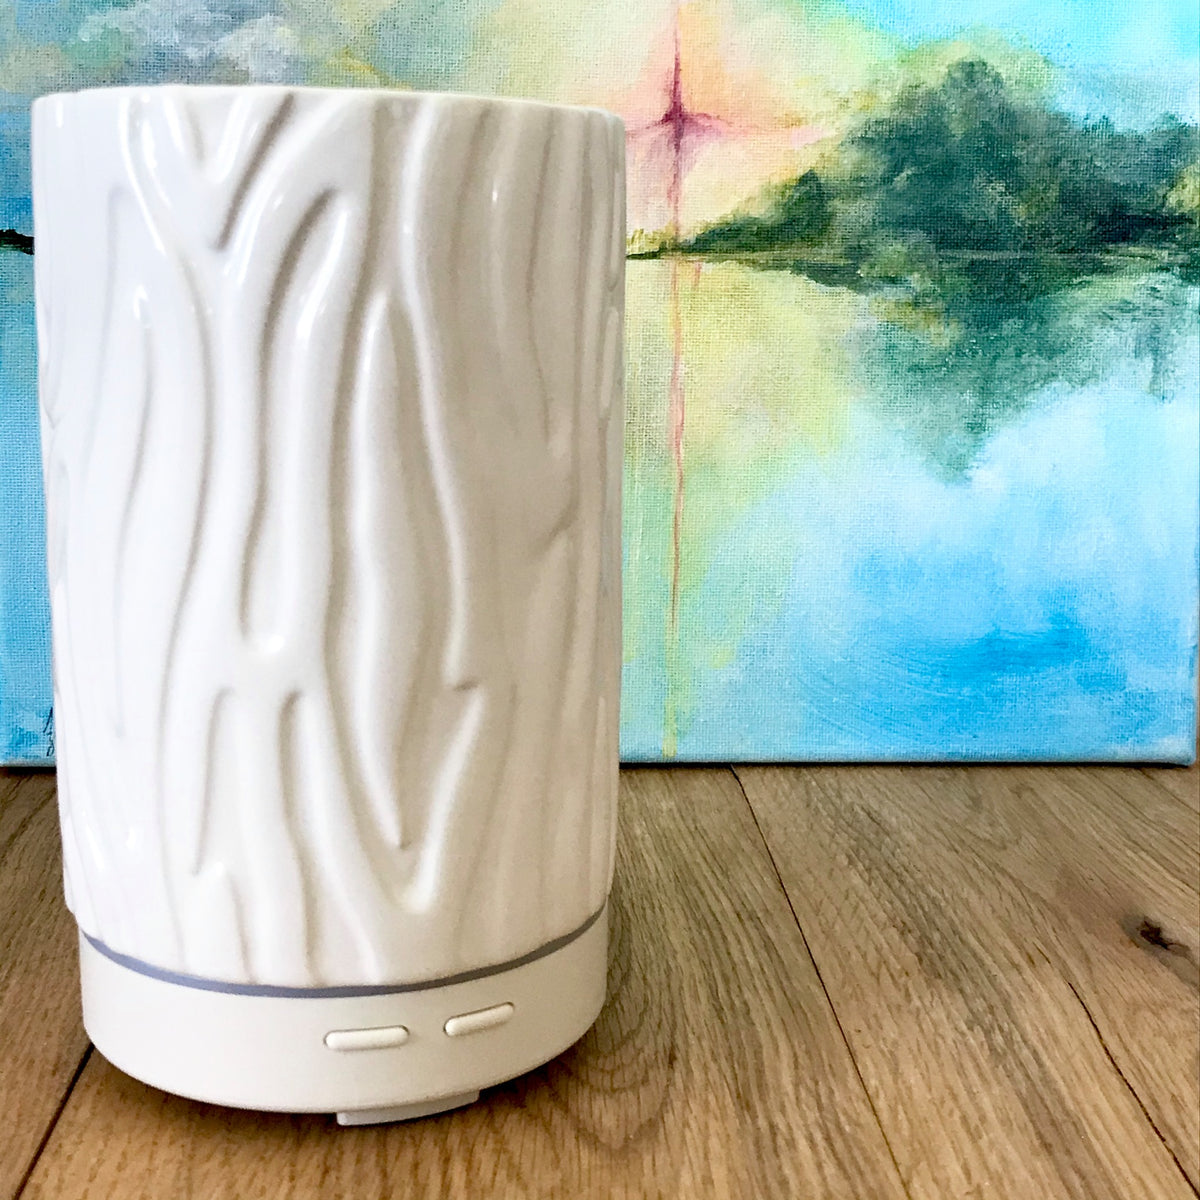 This clean and simple electric ceramic diffuser is perfect to diffuse essential oils in almost any room in your house or office! Features intermittent or continuous diffusion control, color changing light, and auto shut off features.